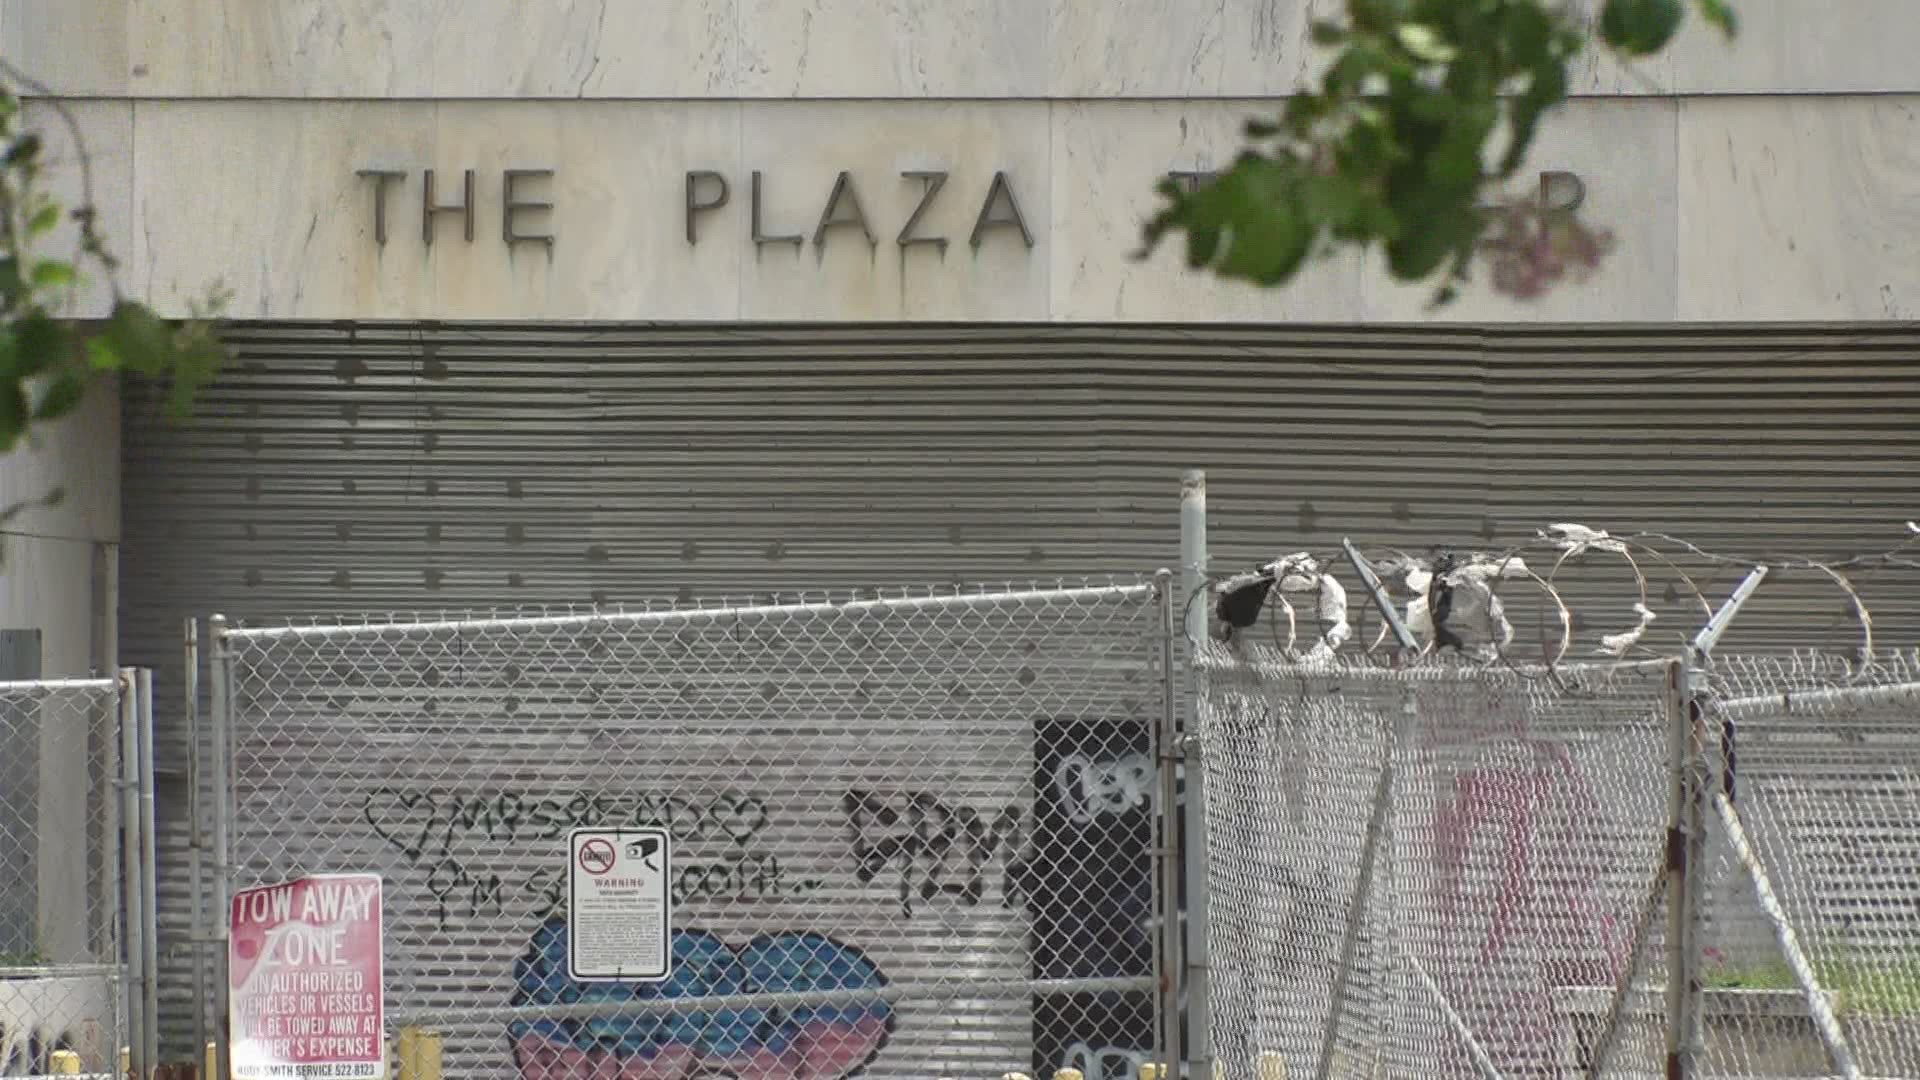 After a man was injured due to winds causing debris to fall off the Plaza Tower, officials said that something will soon get done to prevent further damage.